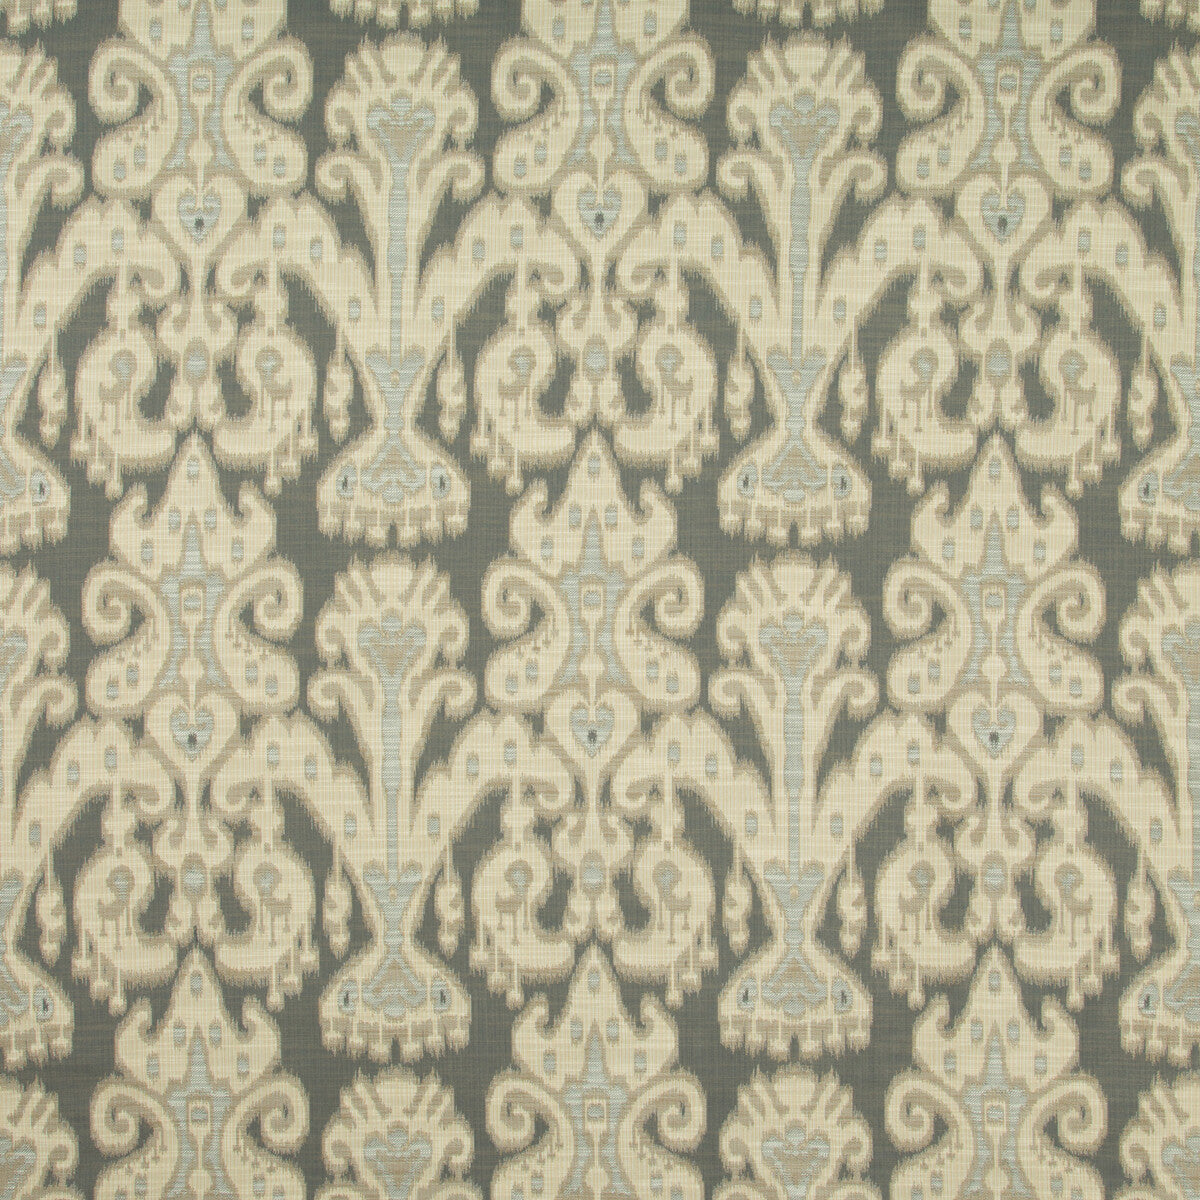 Kravet Contract fabric in 35031-1611 color - pattern 35031.1611.0 - by Kravet Contract in the Incase Crypton Gis collection